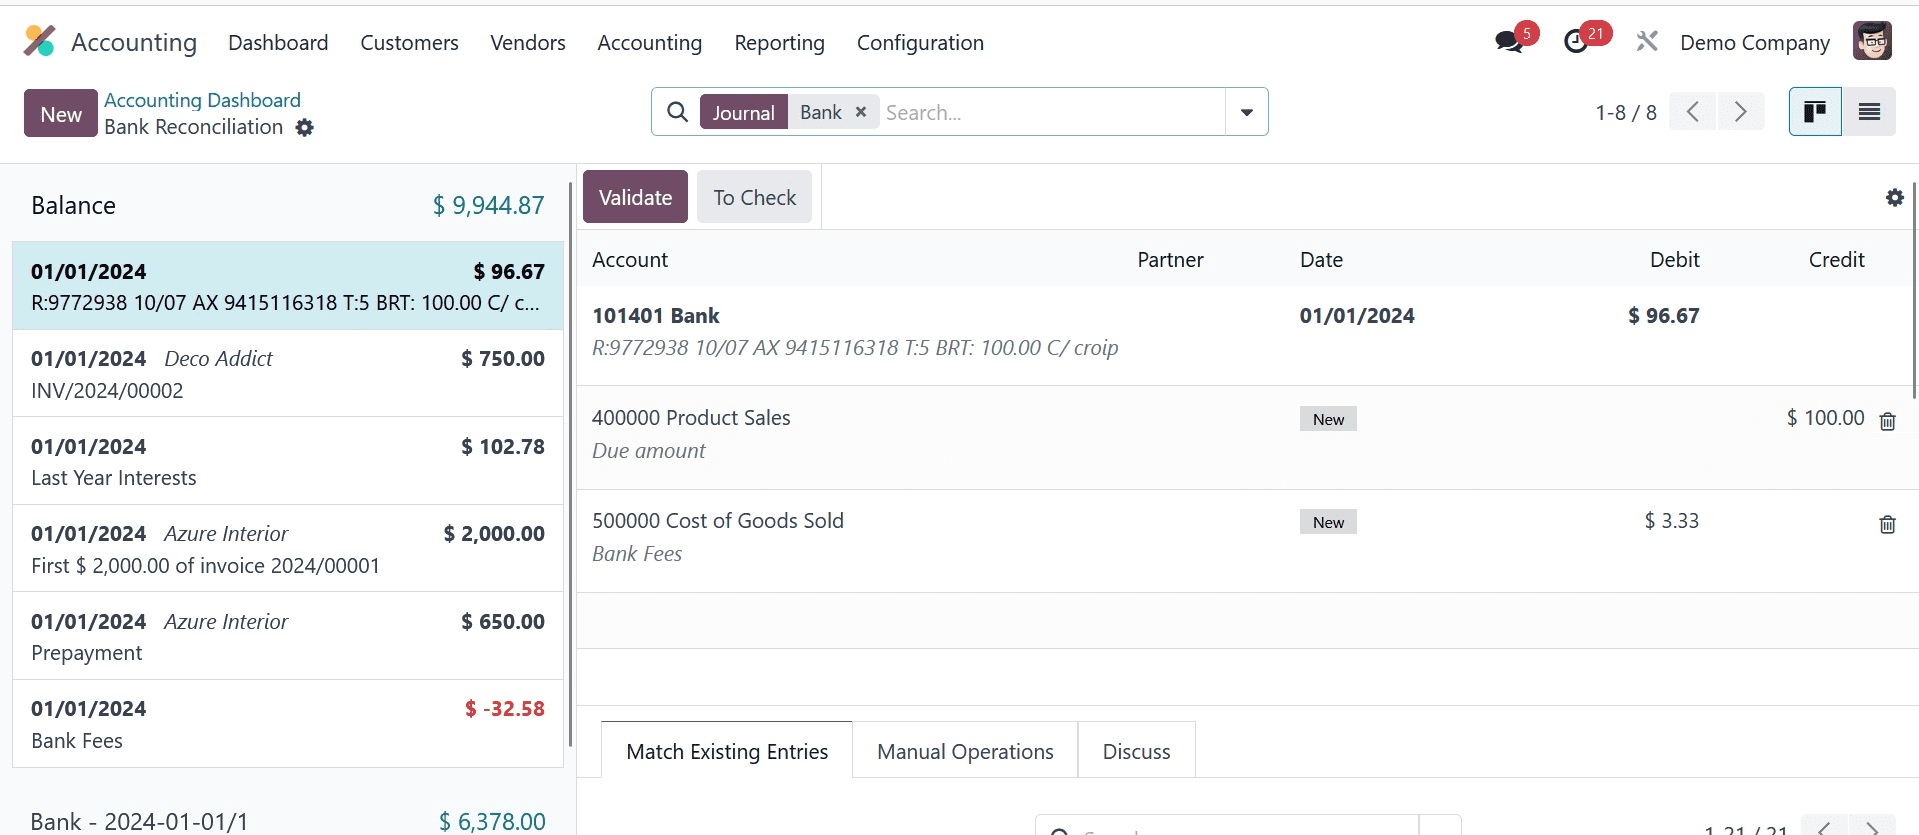 how-to-manage-bank-accounts-and-cash-transfer-among-accounts-in-odoo-17-accounting-8-cybrosys